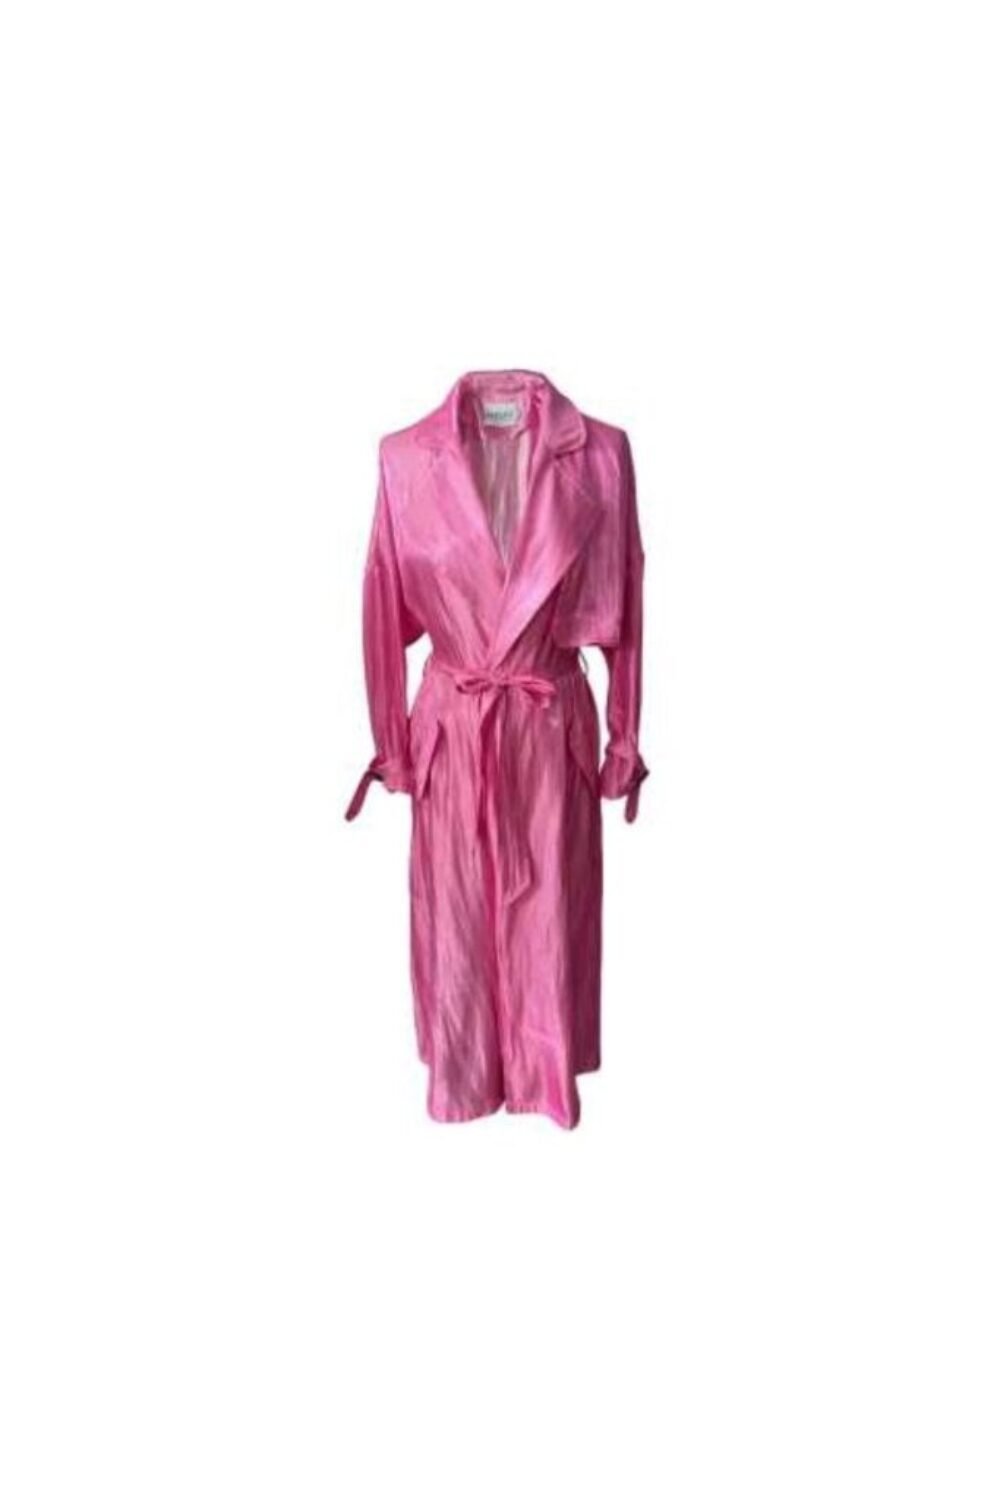 Shop Lux Bamboo Lyocell Faux Leather Trench Coat and women's luxury and designer clothes at www.lux-apparel.co.uk